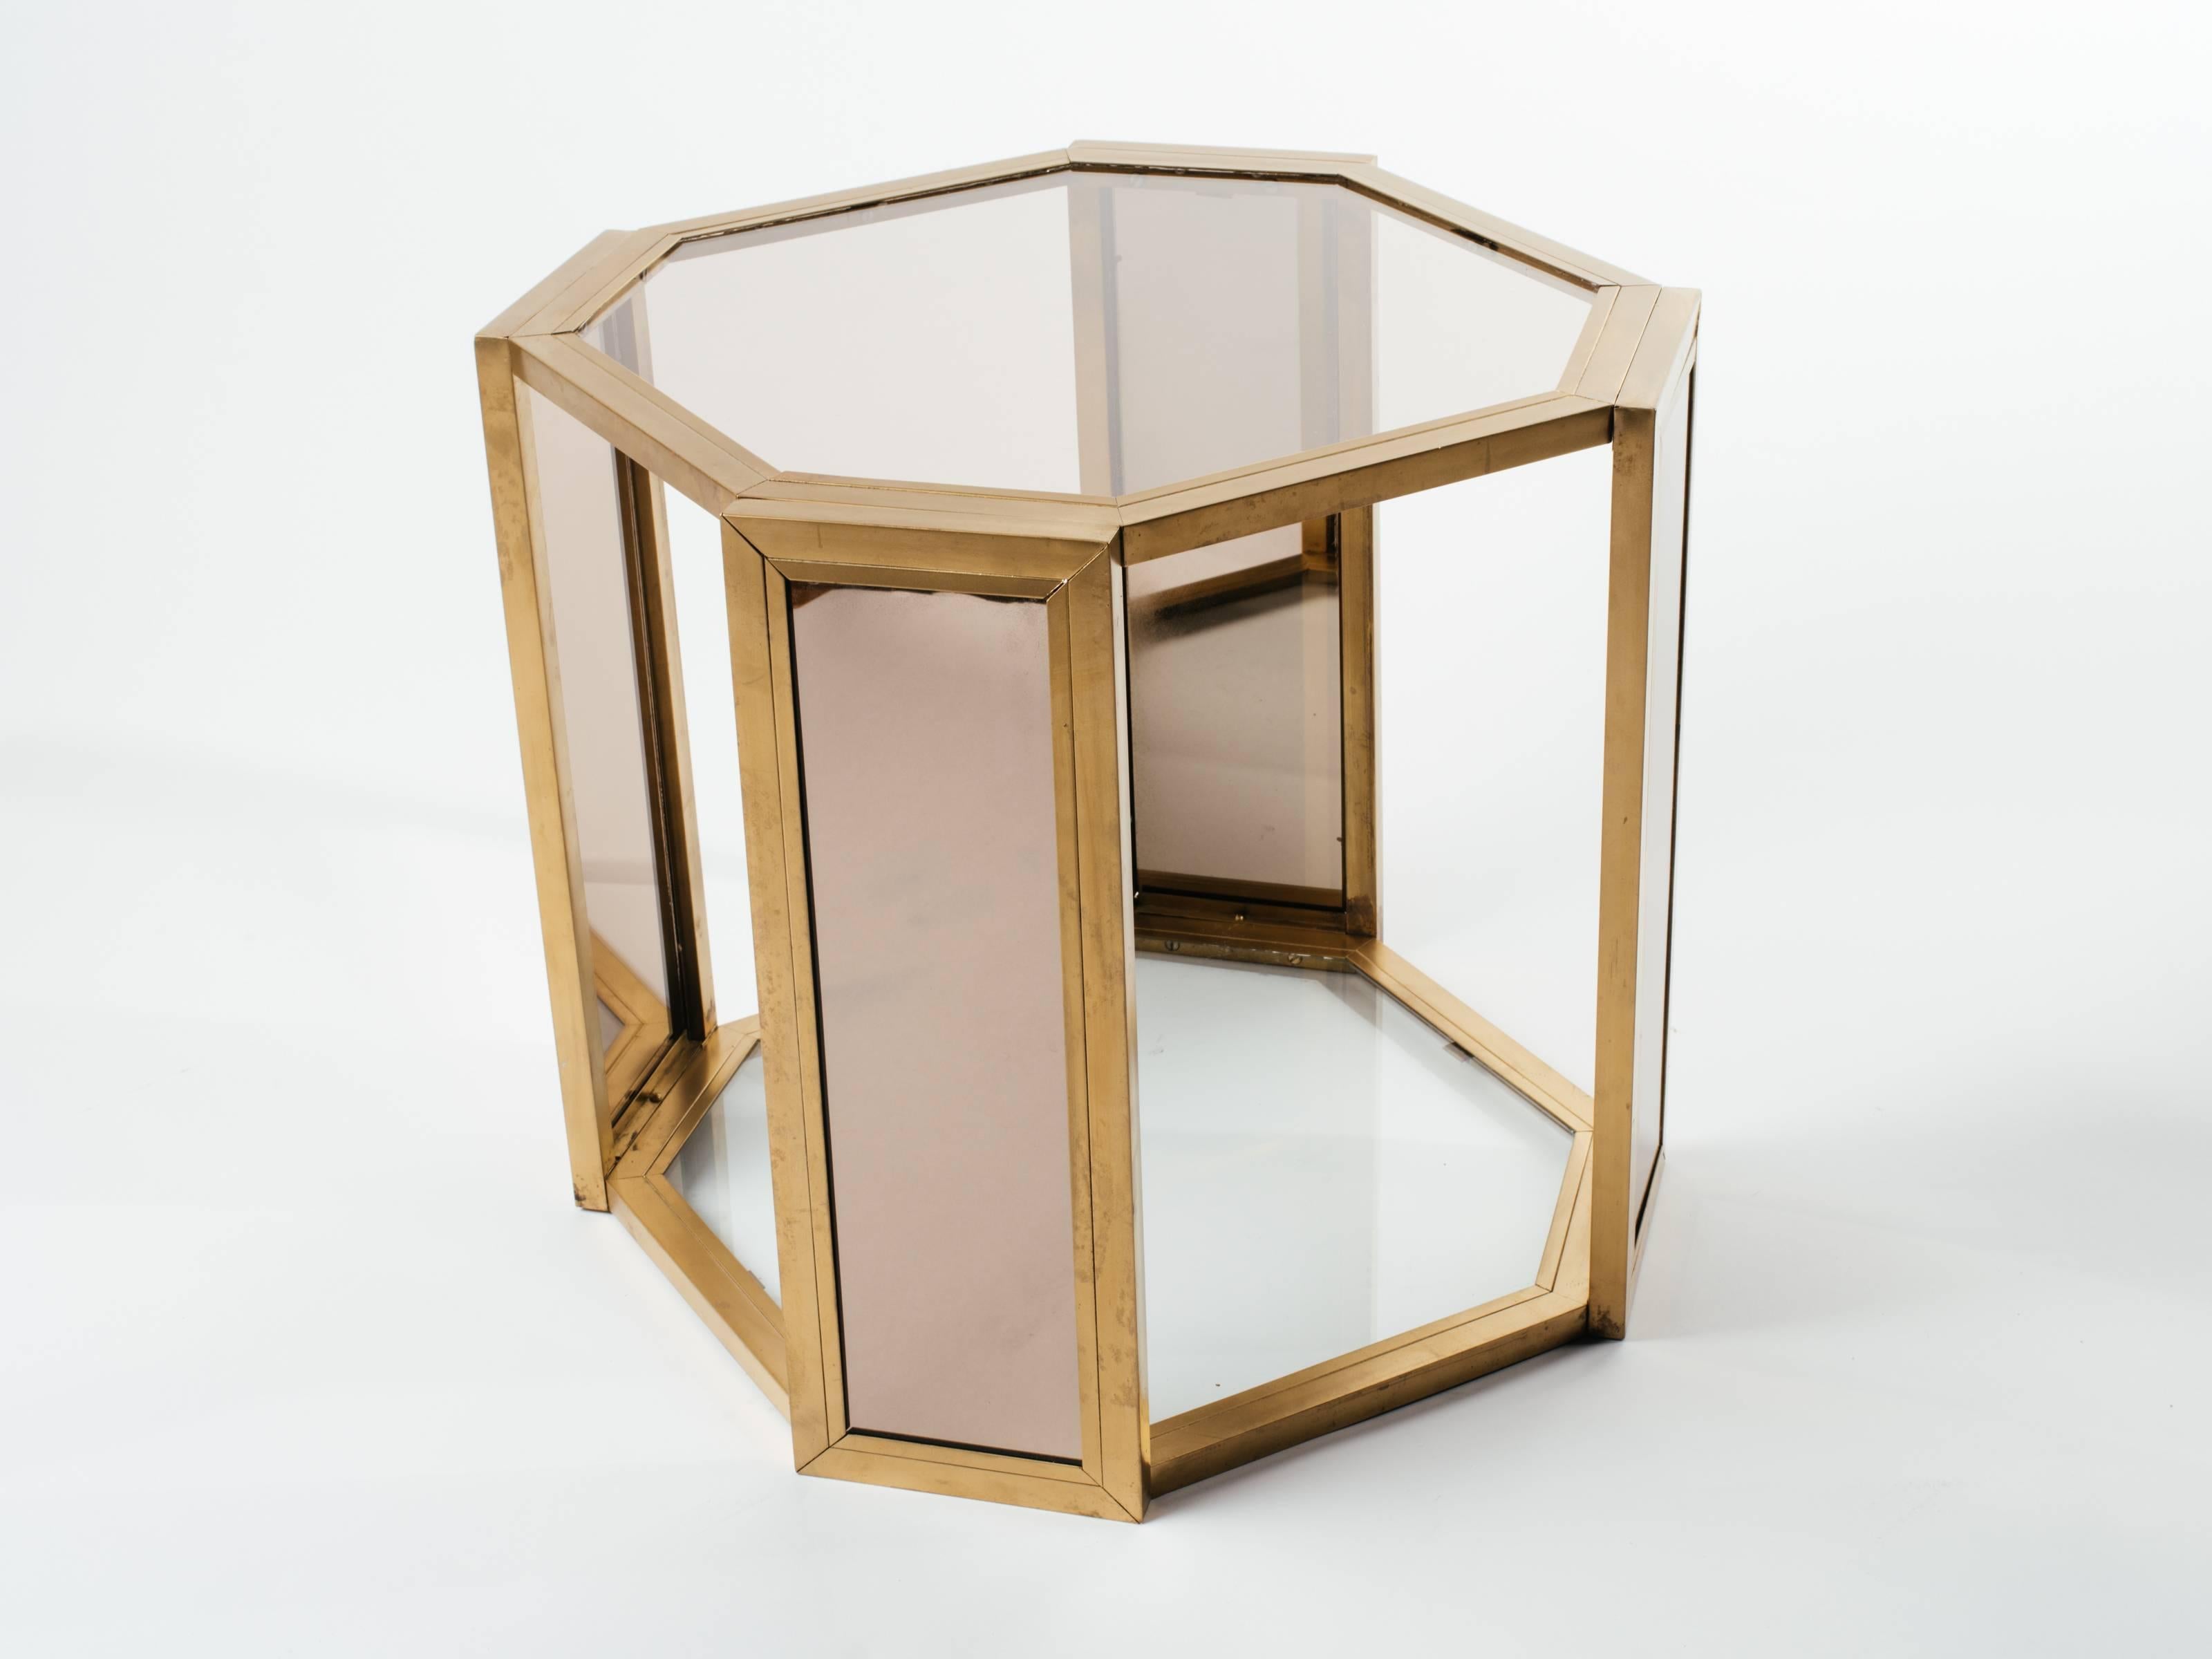 Pair of Hexagon Two Tier Side Tables in Brass and Smoked Glass, c. 1970s For Sale 3